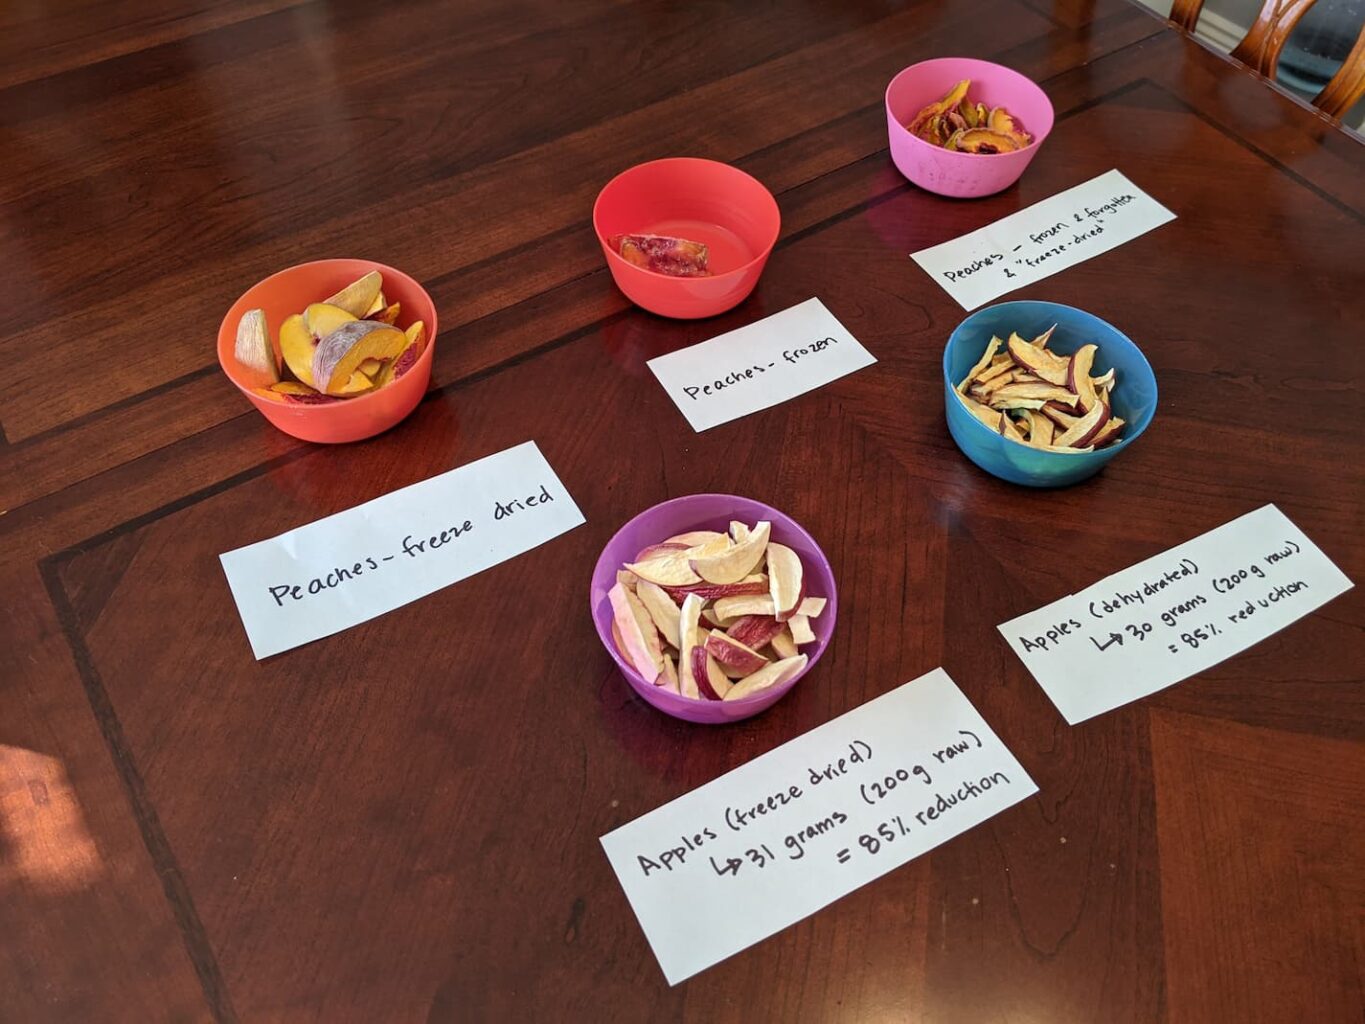 An image of various fruits that were either dehydrated or freeze dried side by side for comparison